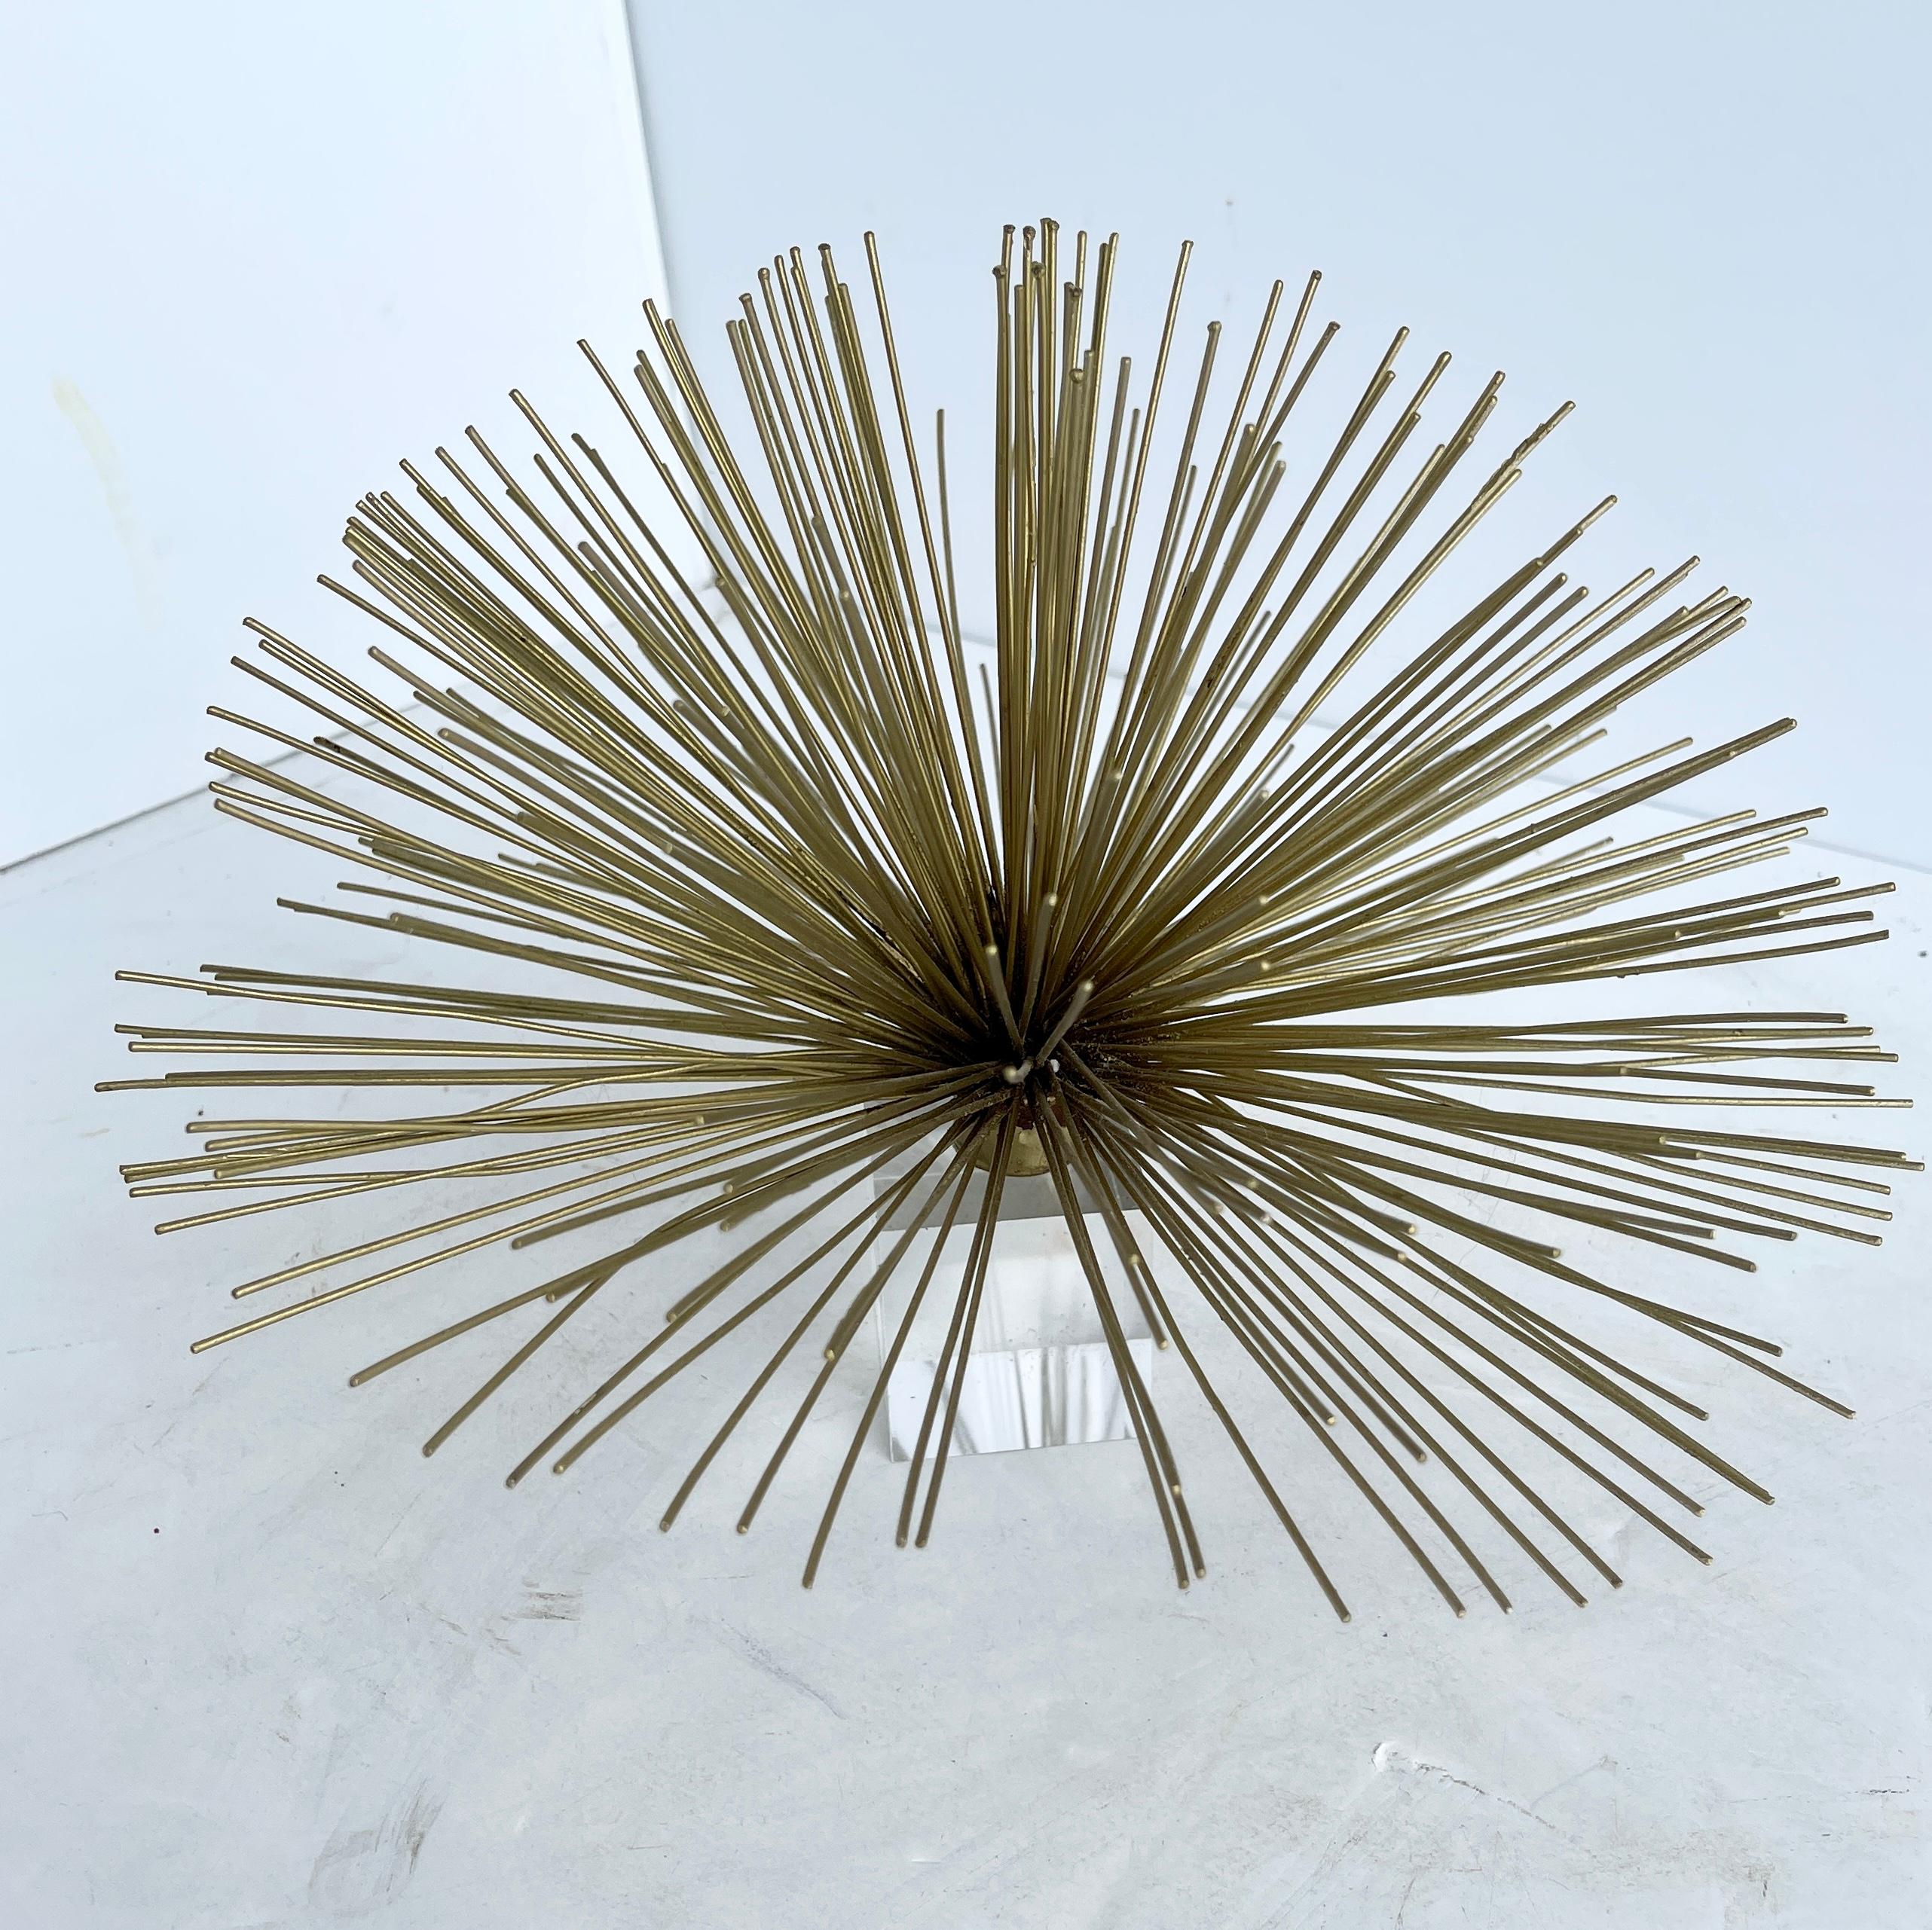 Mid-Century Modern pom-pom wall sculpture, in Curtis Jere style.
This Brutalist brass wall sculpture is an iconic Pom-Pom or Starburst design in the manner of Curtis Jere. The sculpture captures the 1960s-1970s with its architectural form and